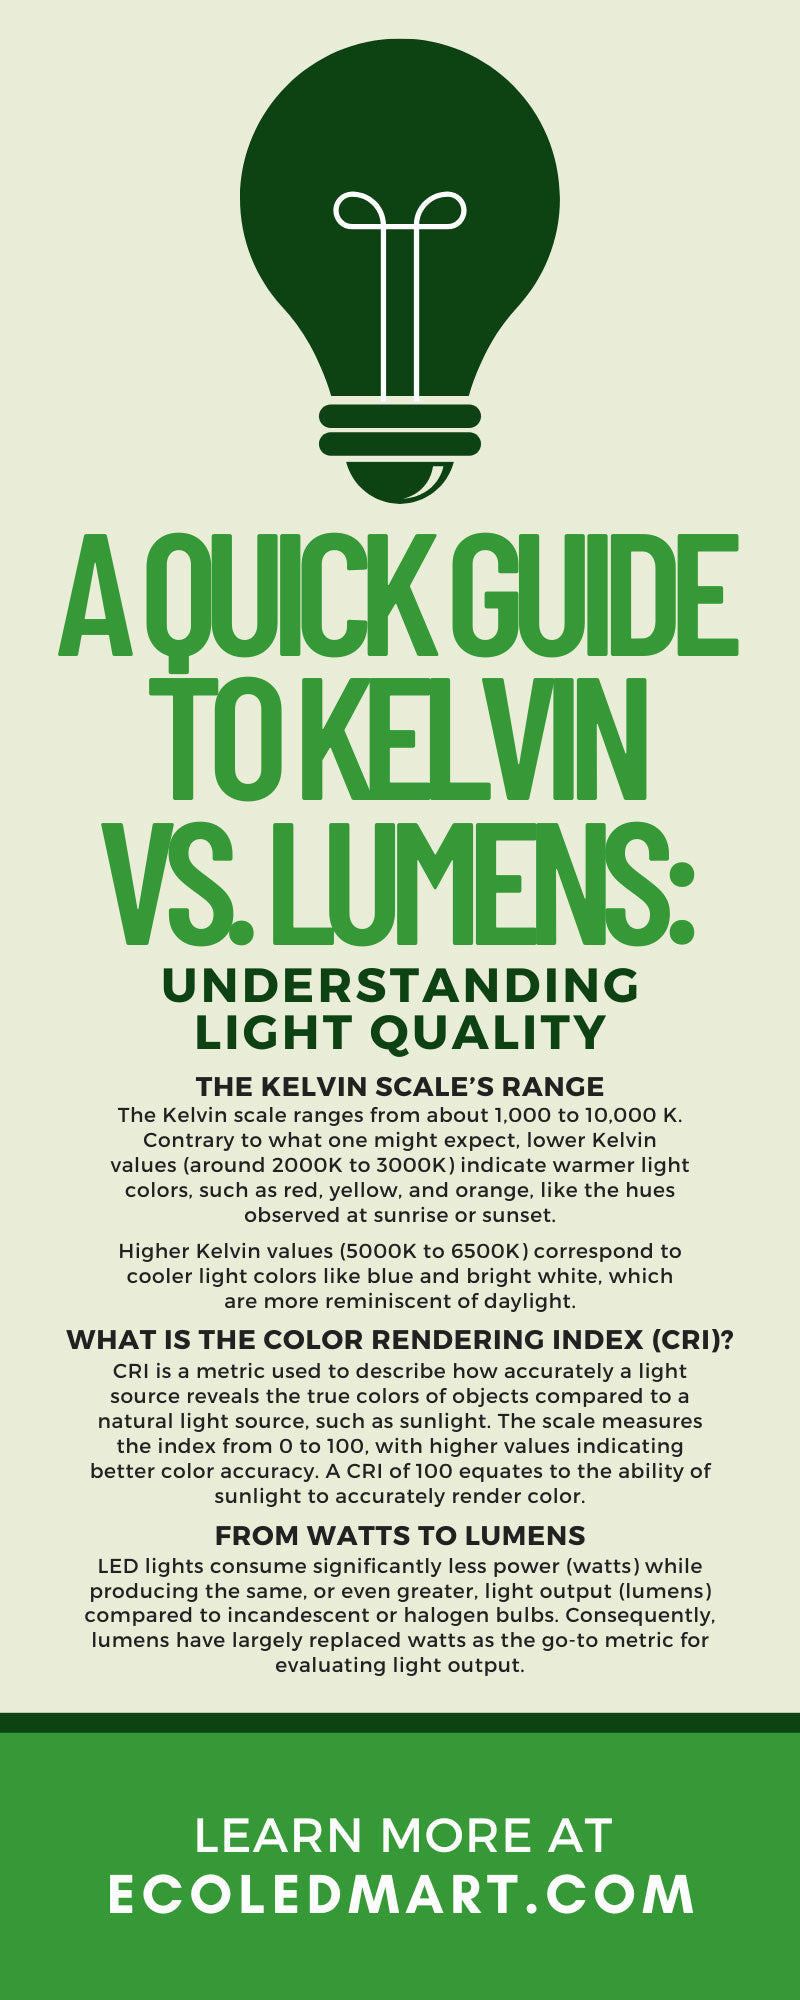 A Quick Guide To Kelvin vs. Lumens: Understanding Light Quality